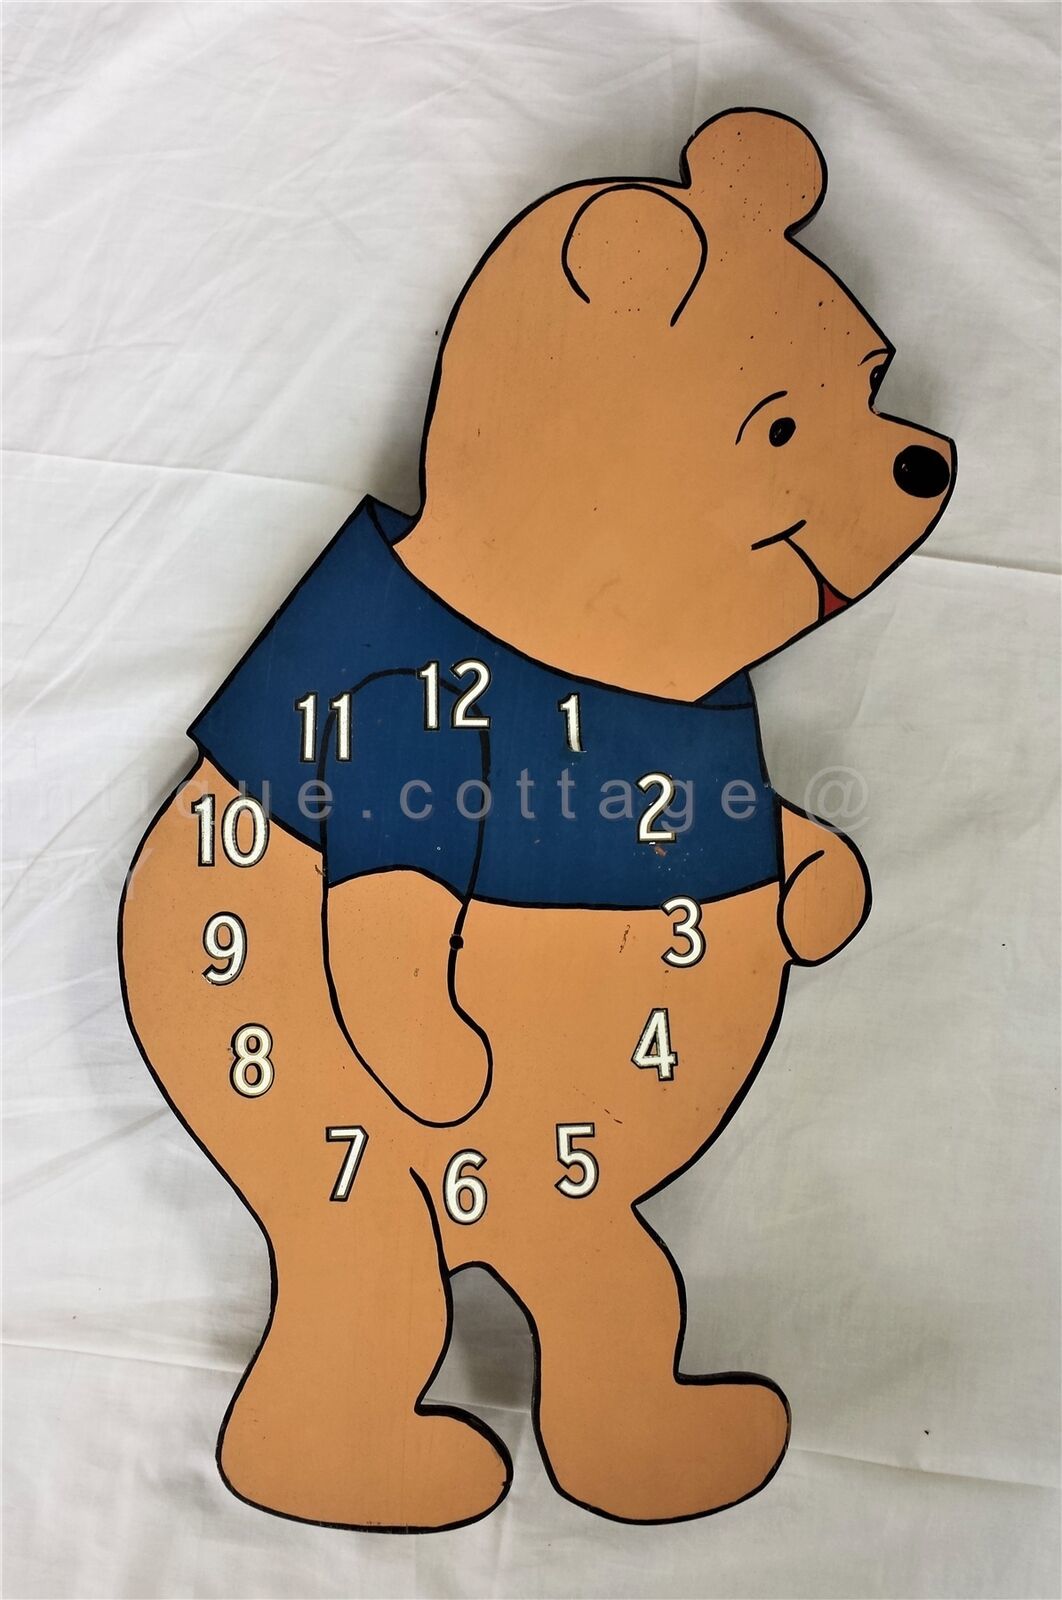 Primary image for vintage 30" wood WINNIE THE POOH large hanging wall clock face art OOAK handmade